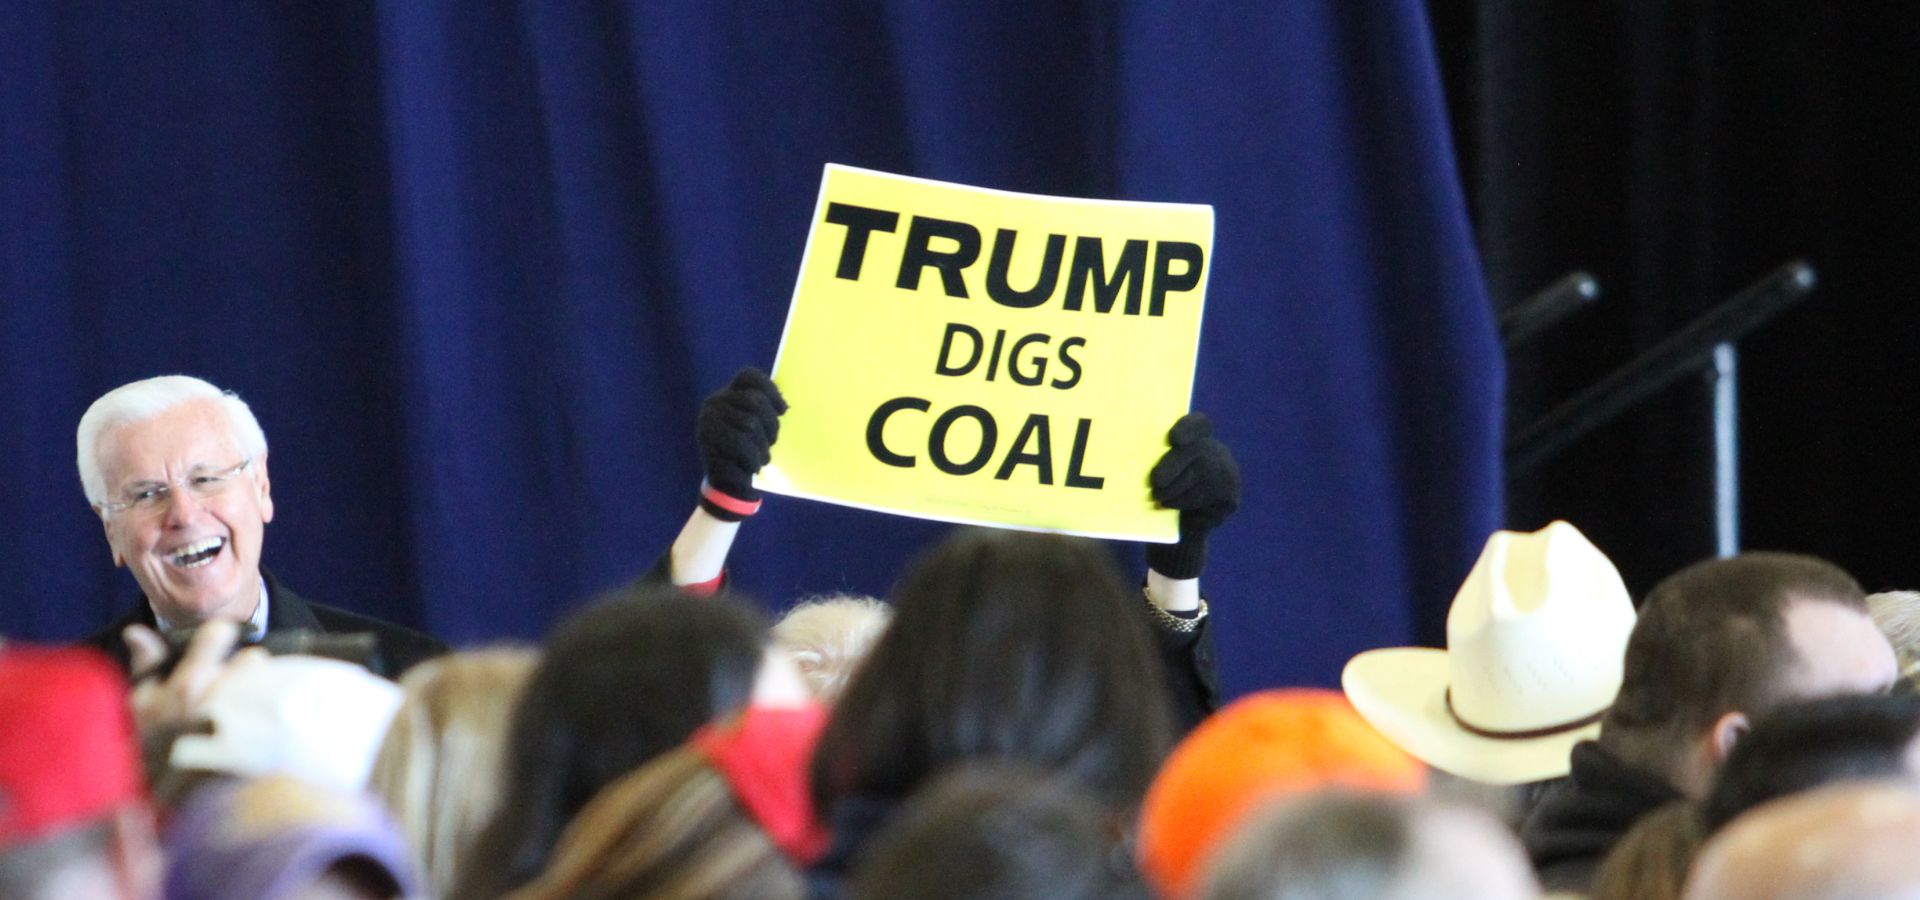 a Trump supporter holding up a "trump digs coal" sign at a rally